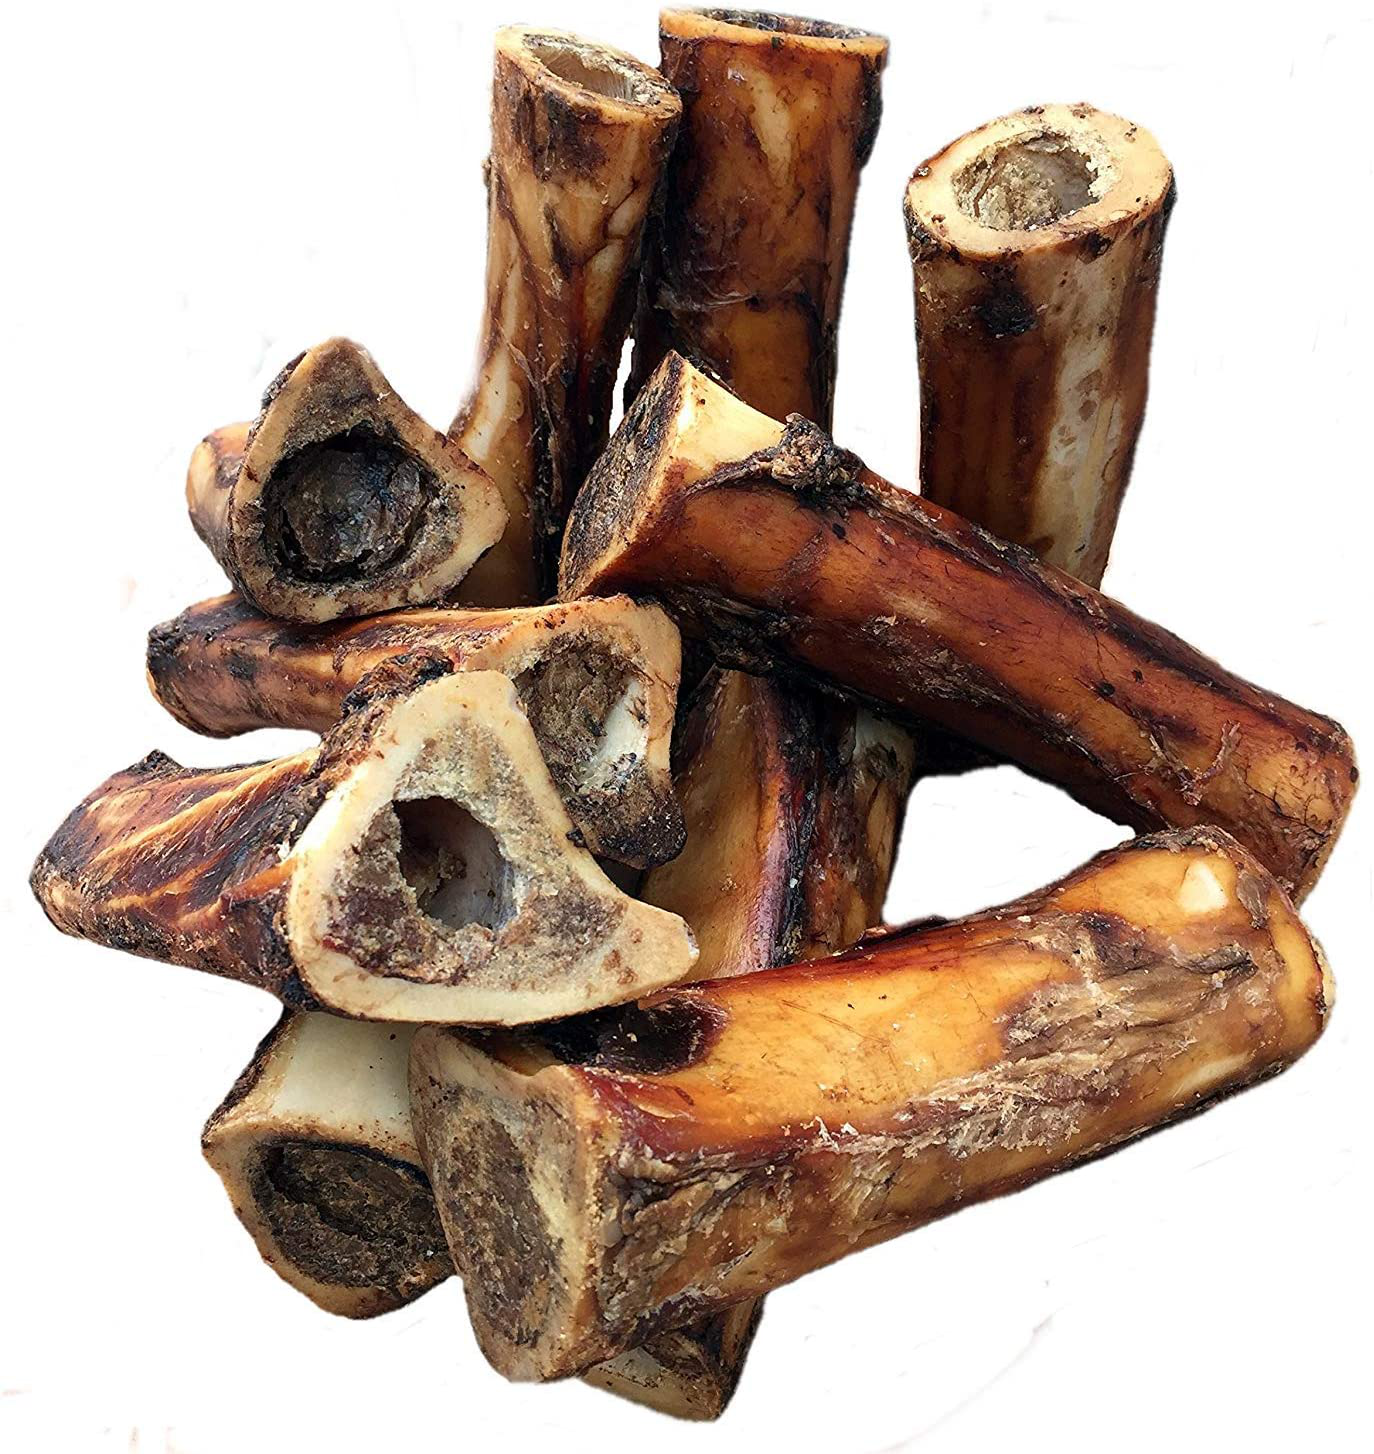 K9 Connoisseur Single Ingredient Dog Bones Made in USA for Large Breed Aggressive Chewers Natural Long Lasting Meaty Mammoth Marrow Filled Champ Bone Chew Treats Best for Dogs over 50 Pounds Animals & Pet Supplies > Pet Supplies > Dog Supplies > Dog Treats K9 Connoisseur 10 Count (Pack of 1)  